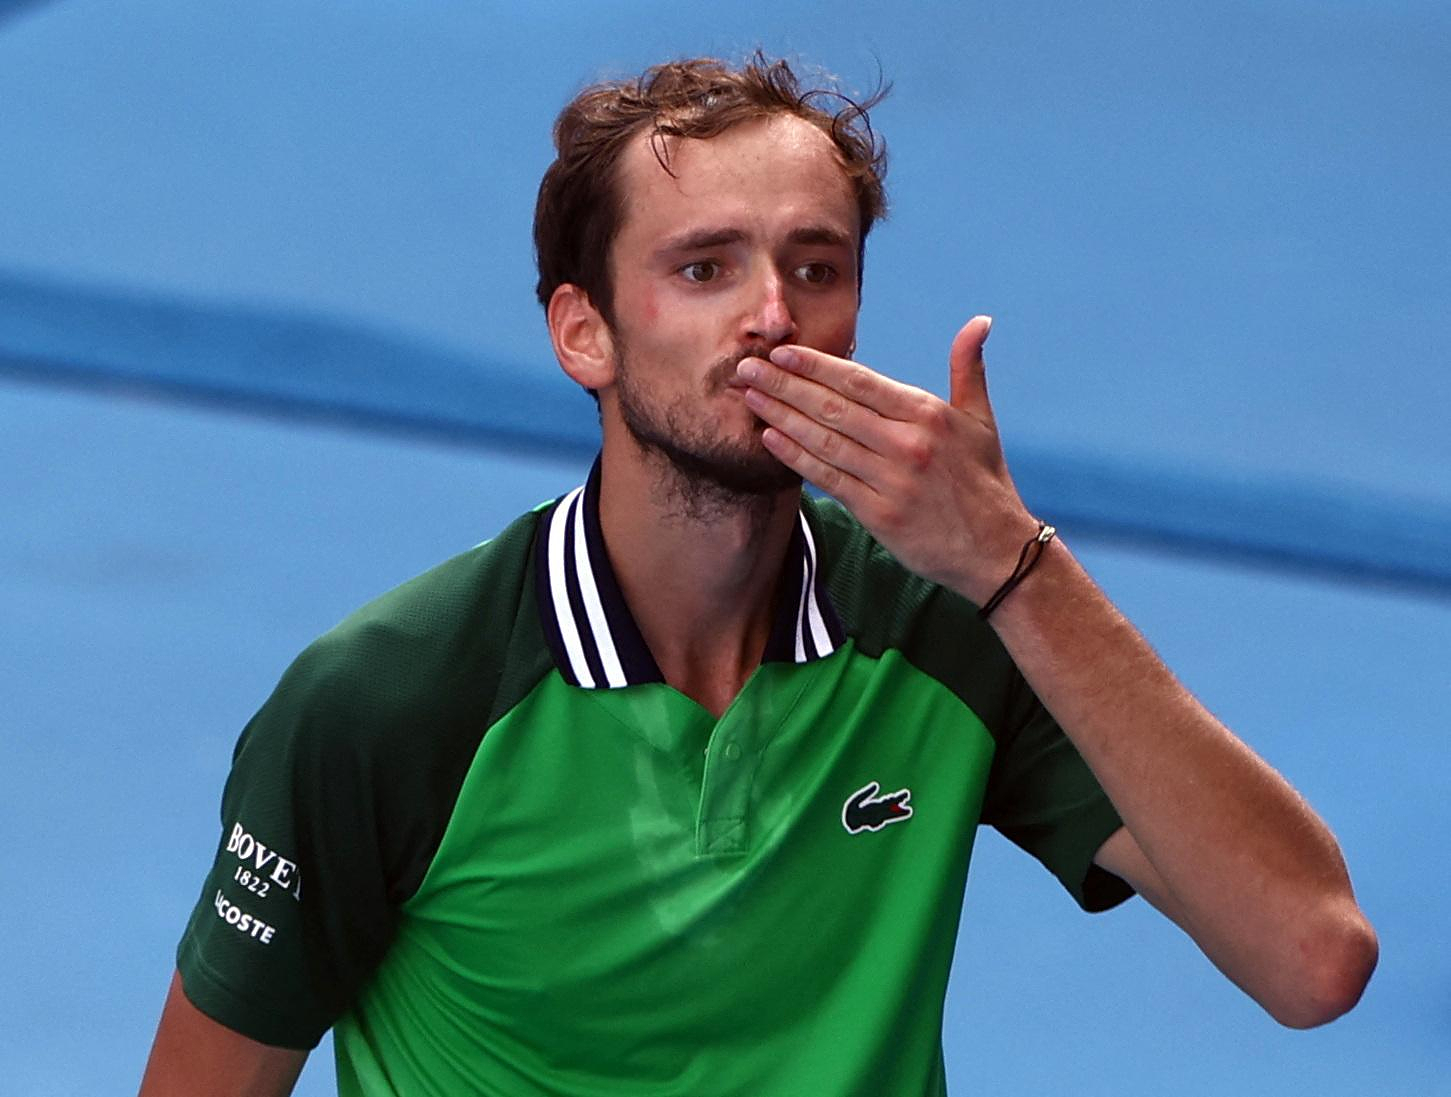 Australian Open: Medvedev dominates Hurkacz in five sets and returns to the final four in Melbourne